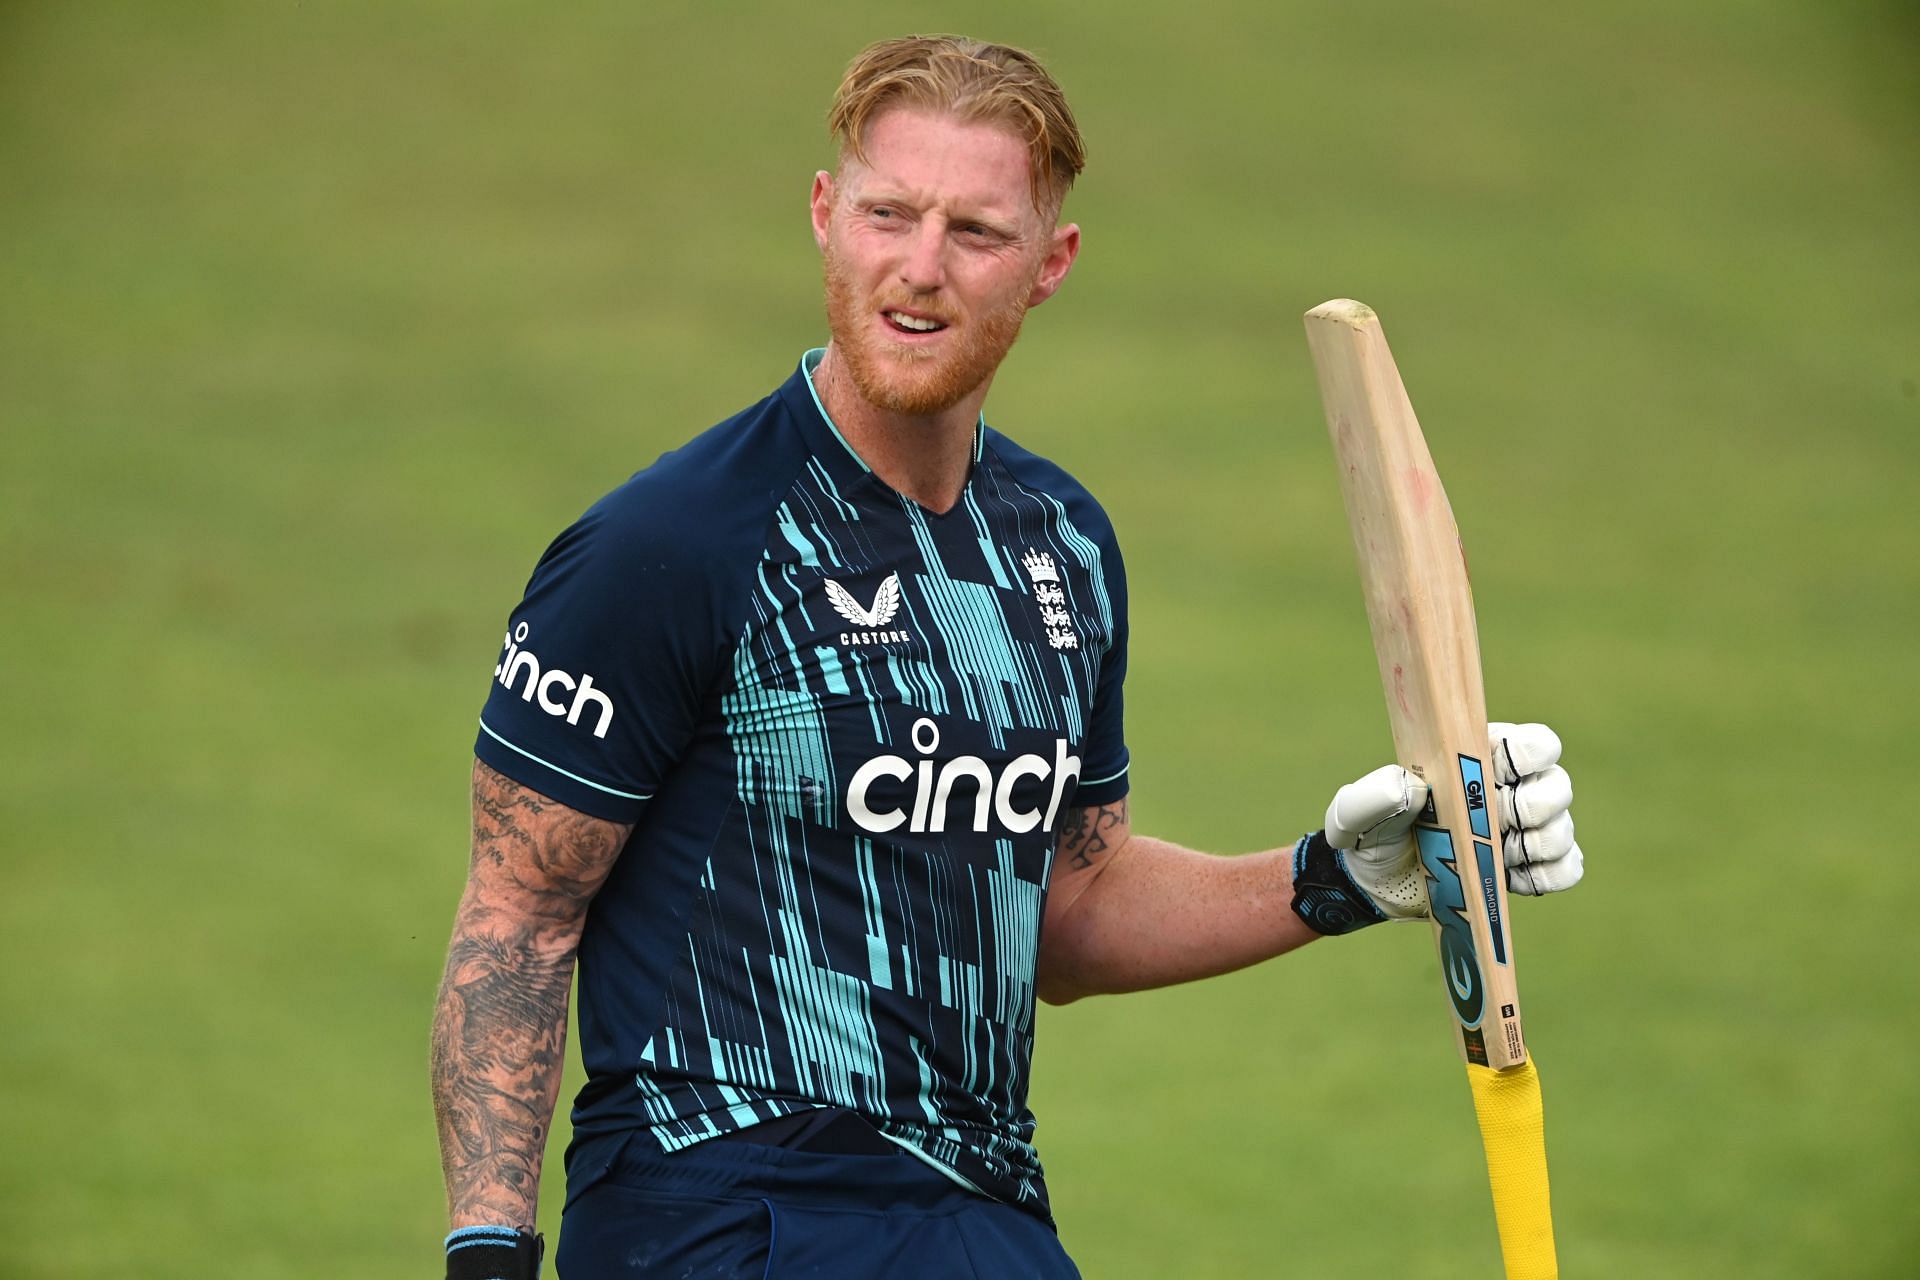 Ben Stokes will continue to play Test and T20 cricket for England. (Credits: Getty)